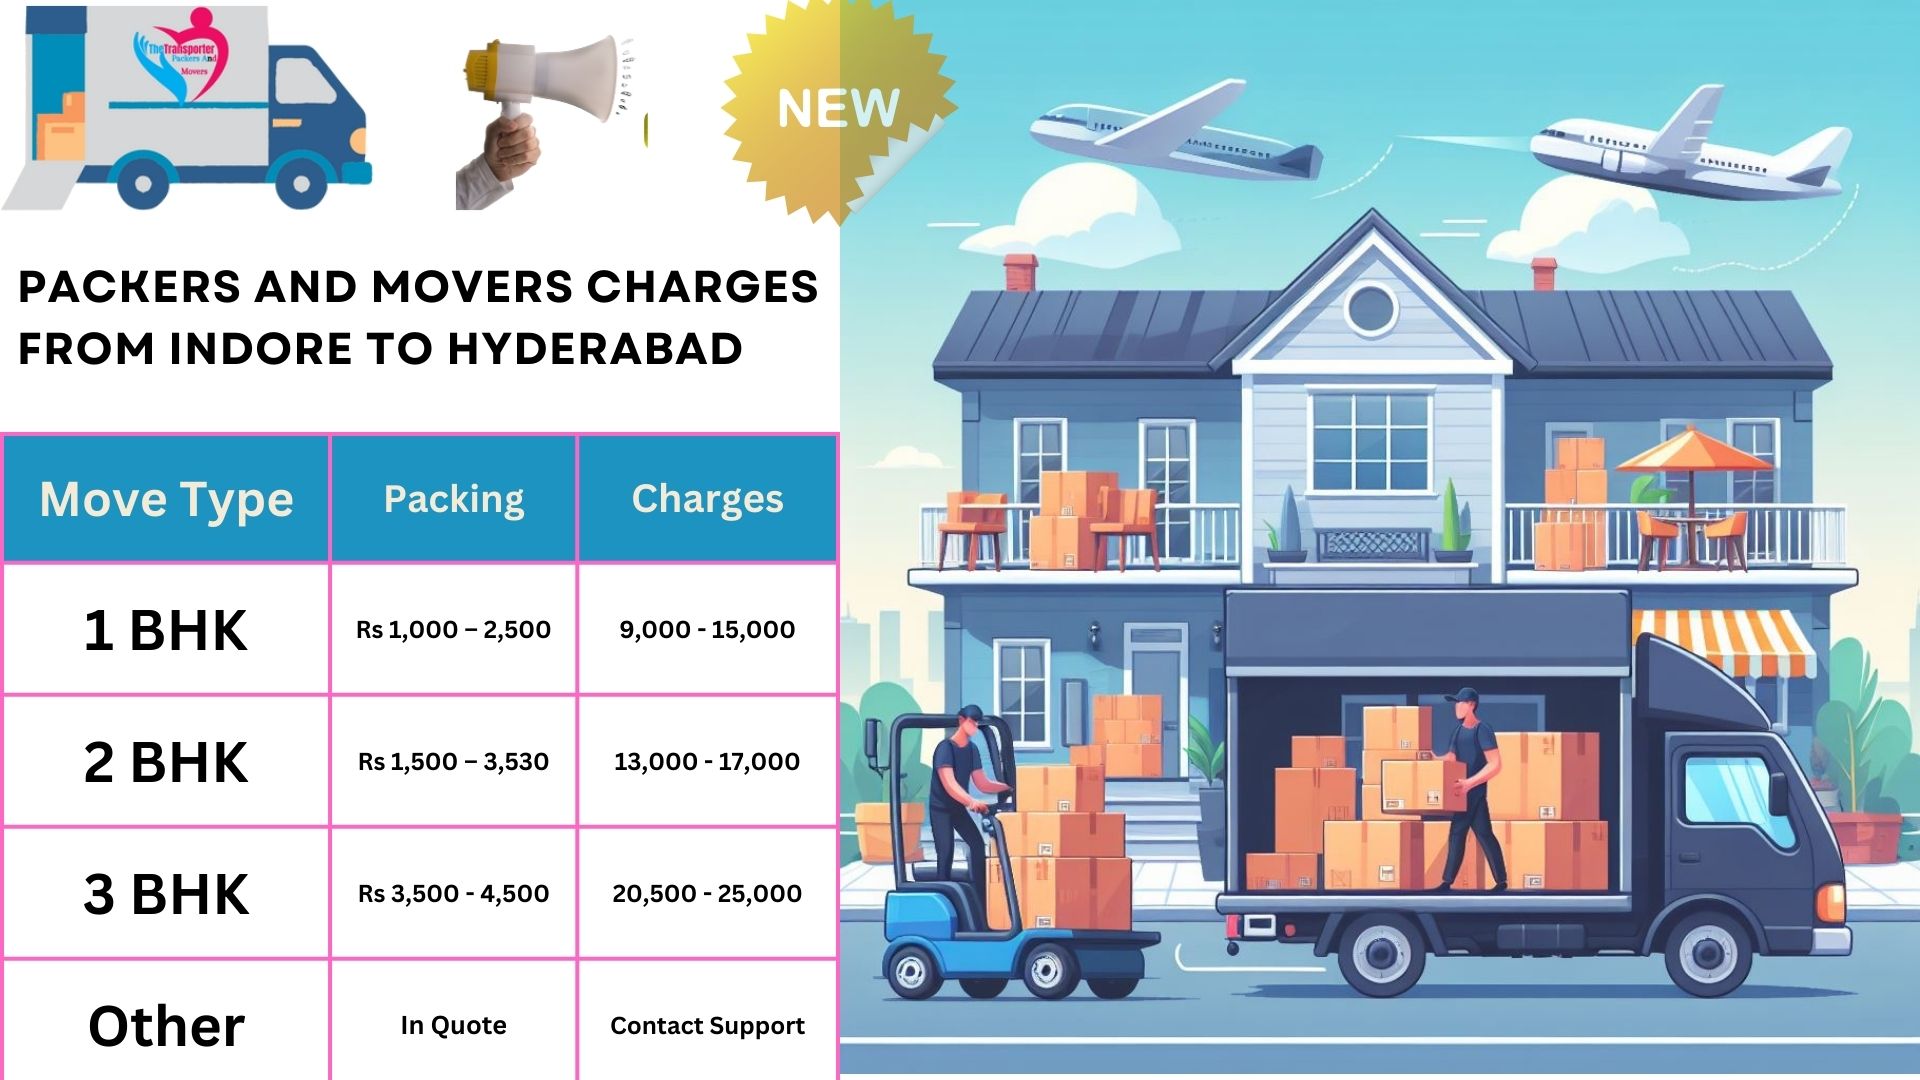 Your household goods shifting from Indore to Hyderabad